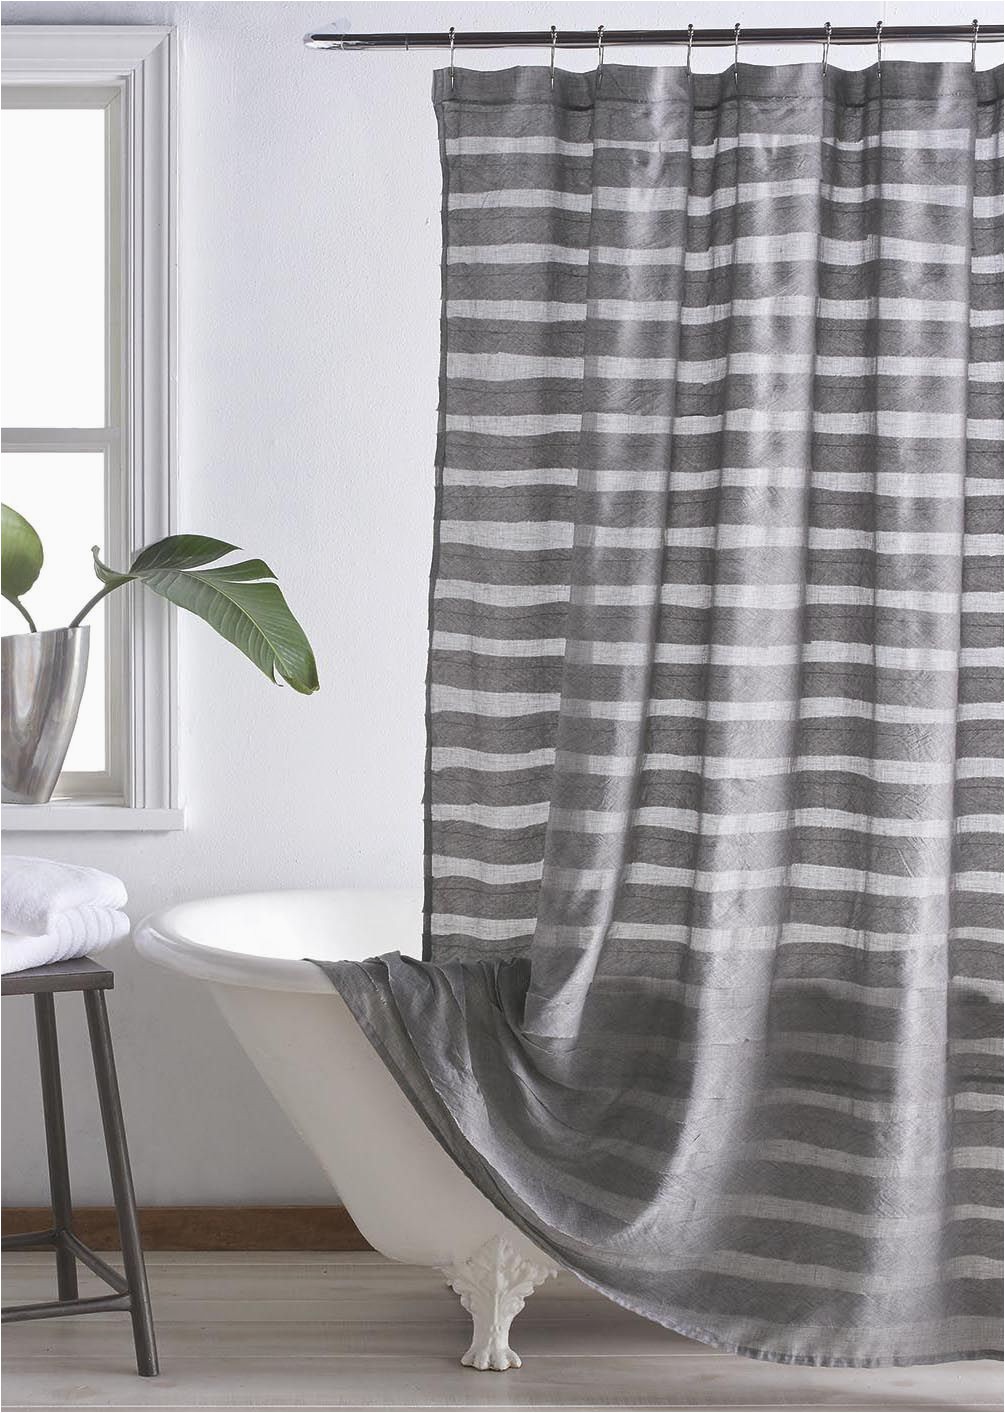 Dkny Highline Stripe Bath Rug Create A Relaxing Retreat In Your Bathroom with the Dkny